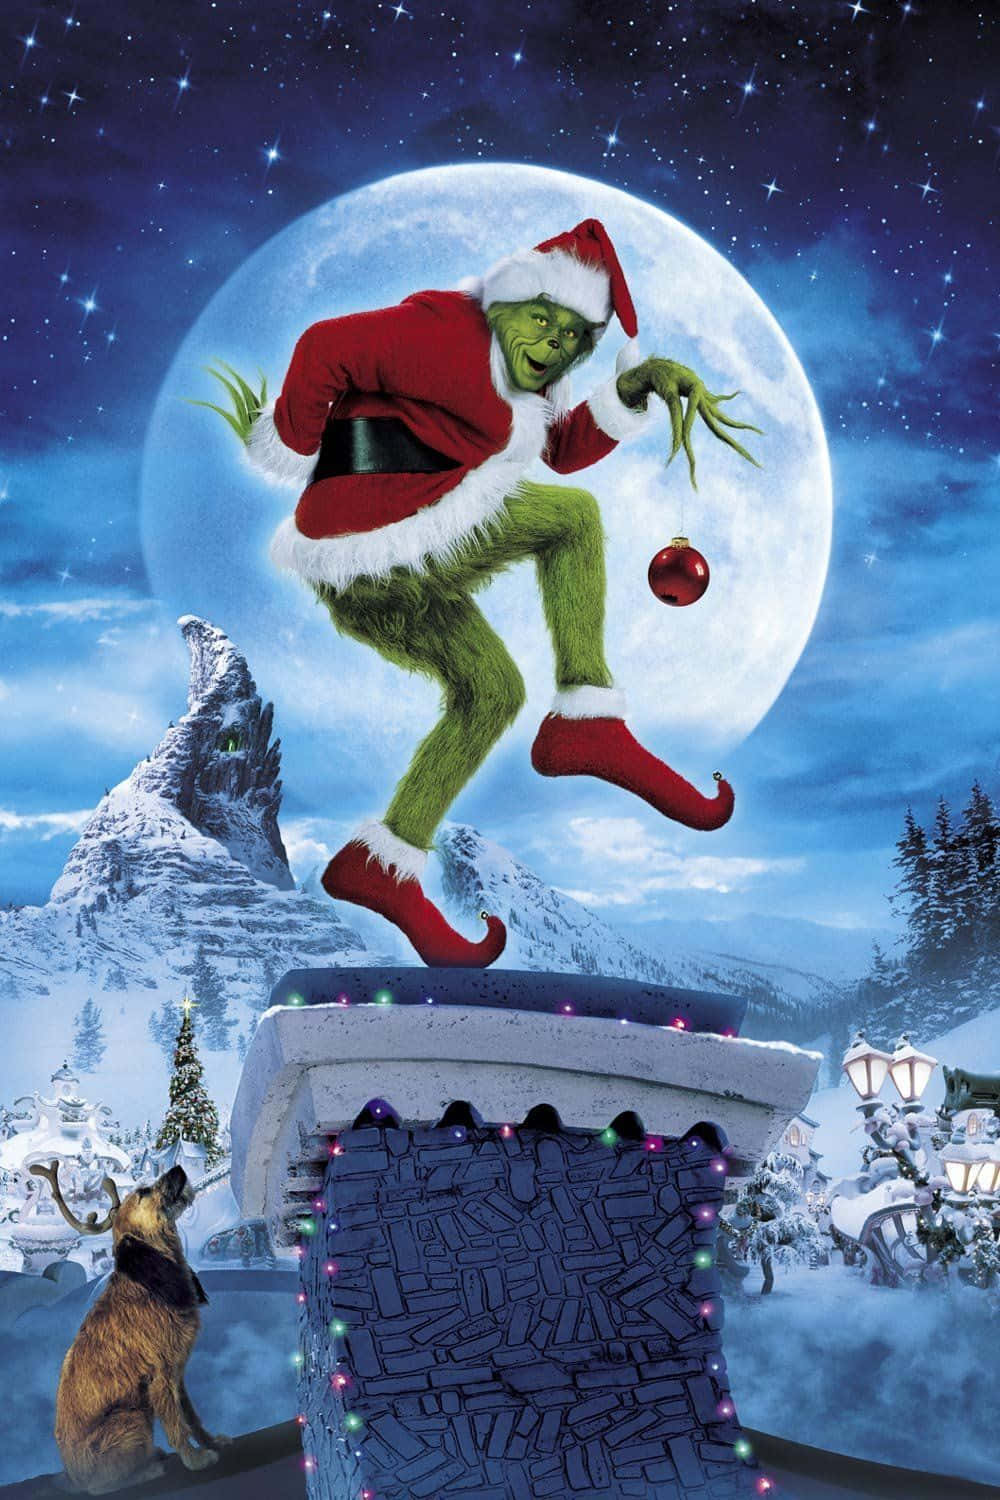 Spread Holiday Cheer With A Smirk, The Christmas Grinch Is Here!